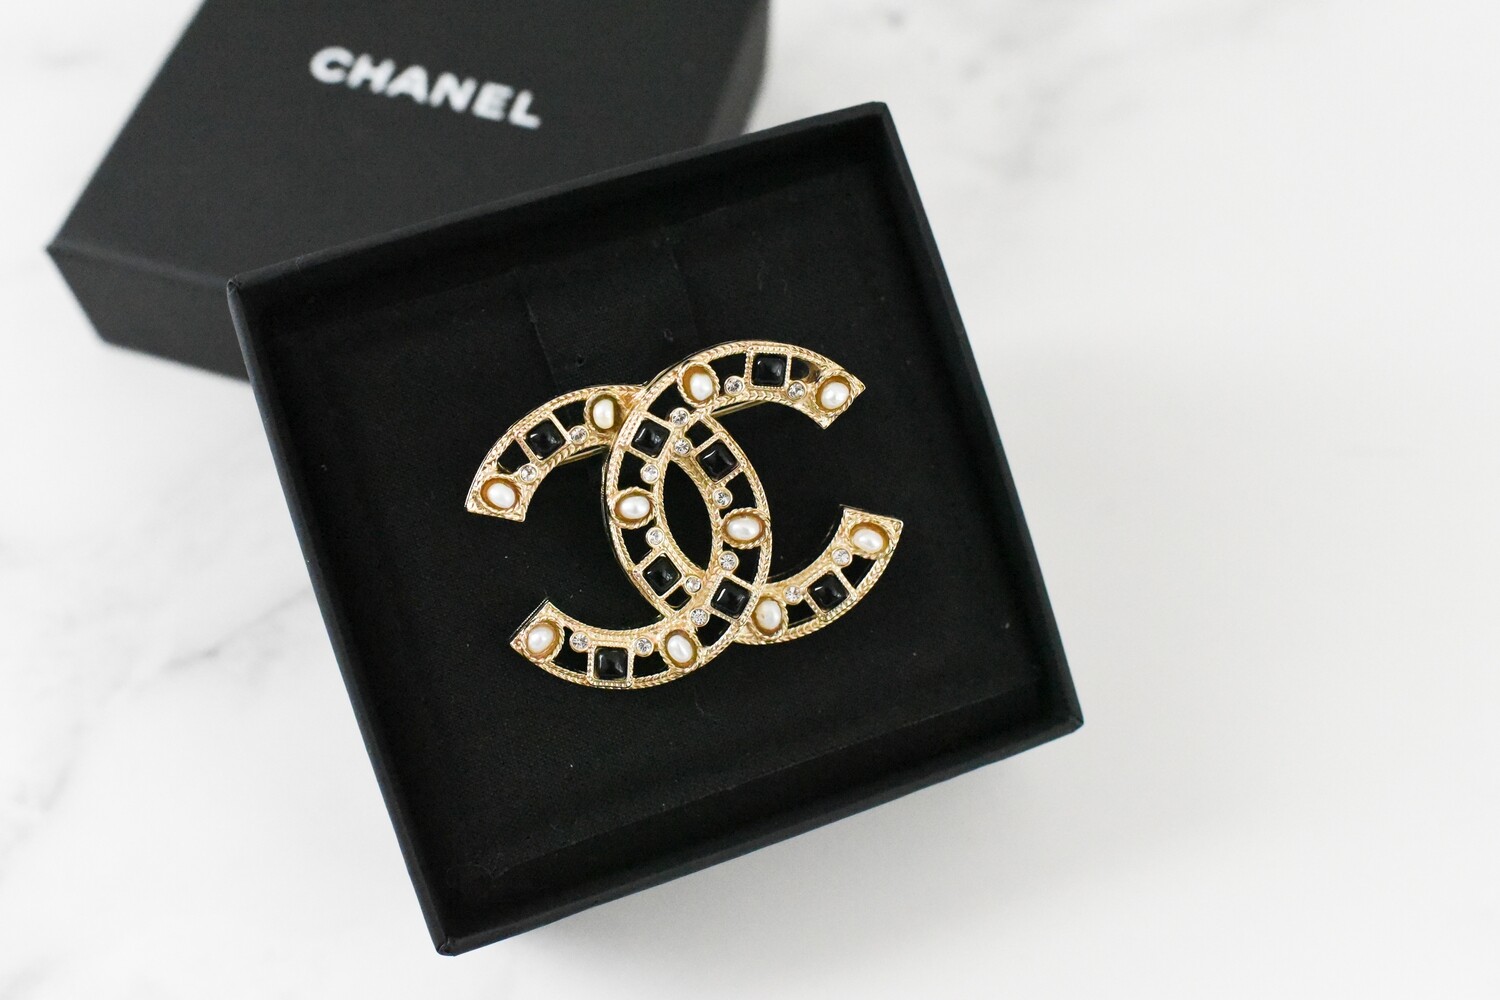 Chanel CC Brooch in Gold with Crystals, Pearls & Black Stones, New in Box  GA001